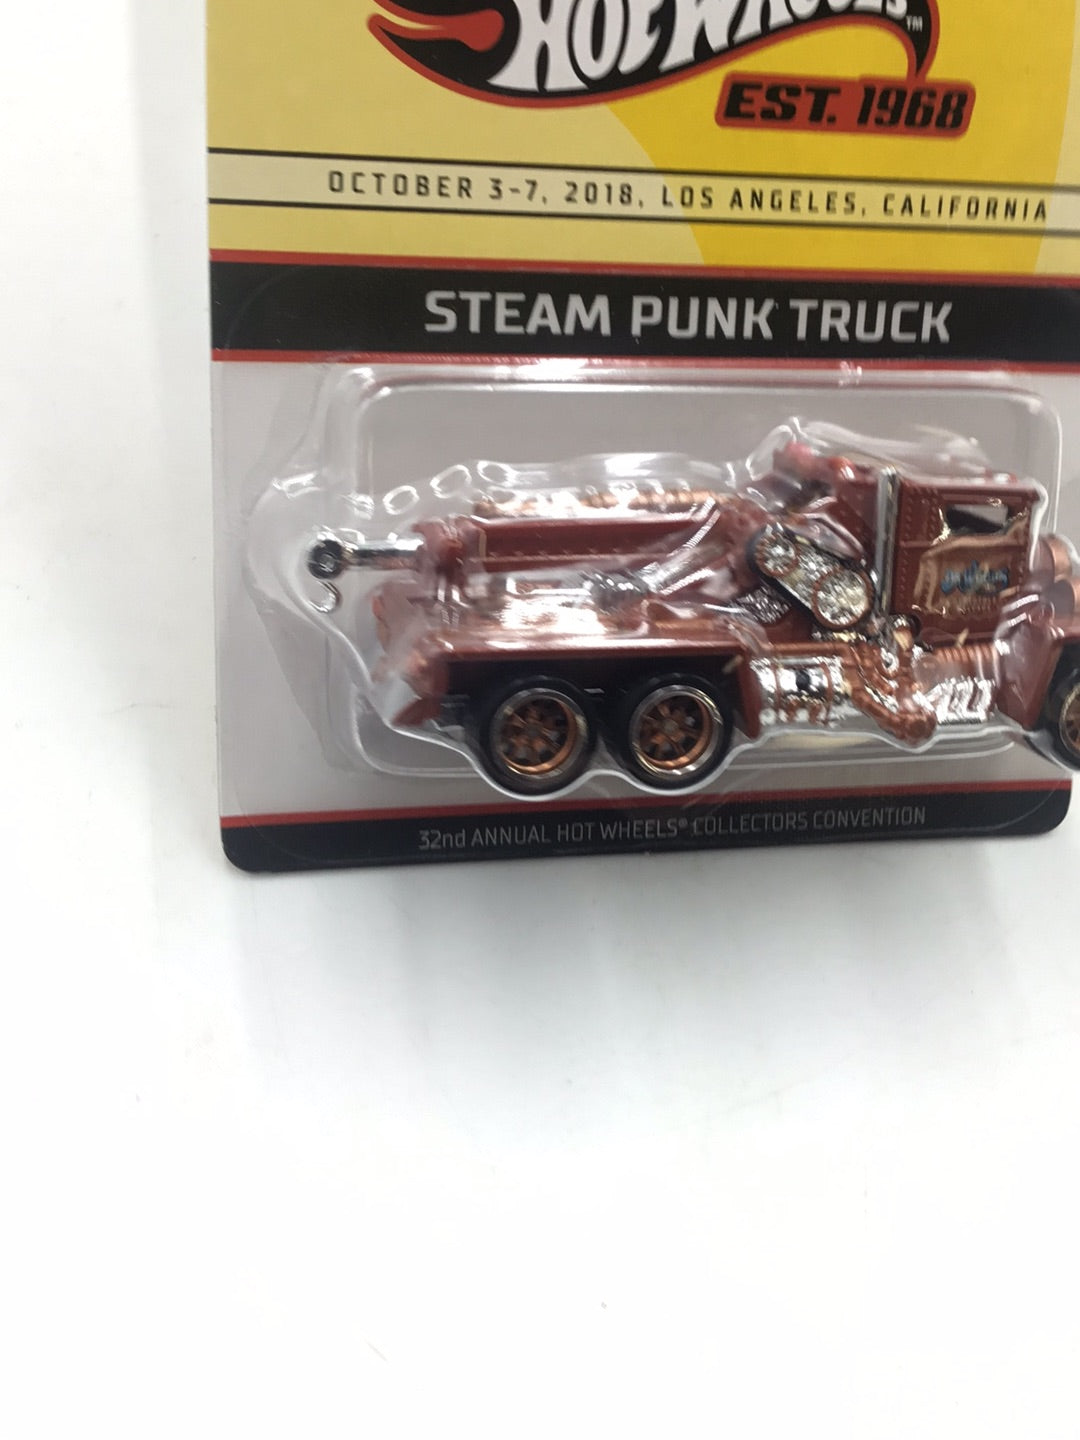 Hot wheels 32nd annual collectors Convention Steam Punk Truck 1700/4000 VHTF with protector